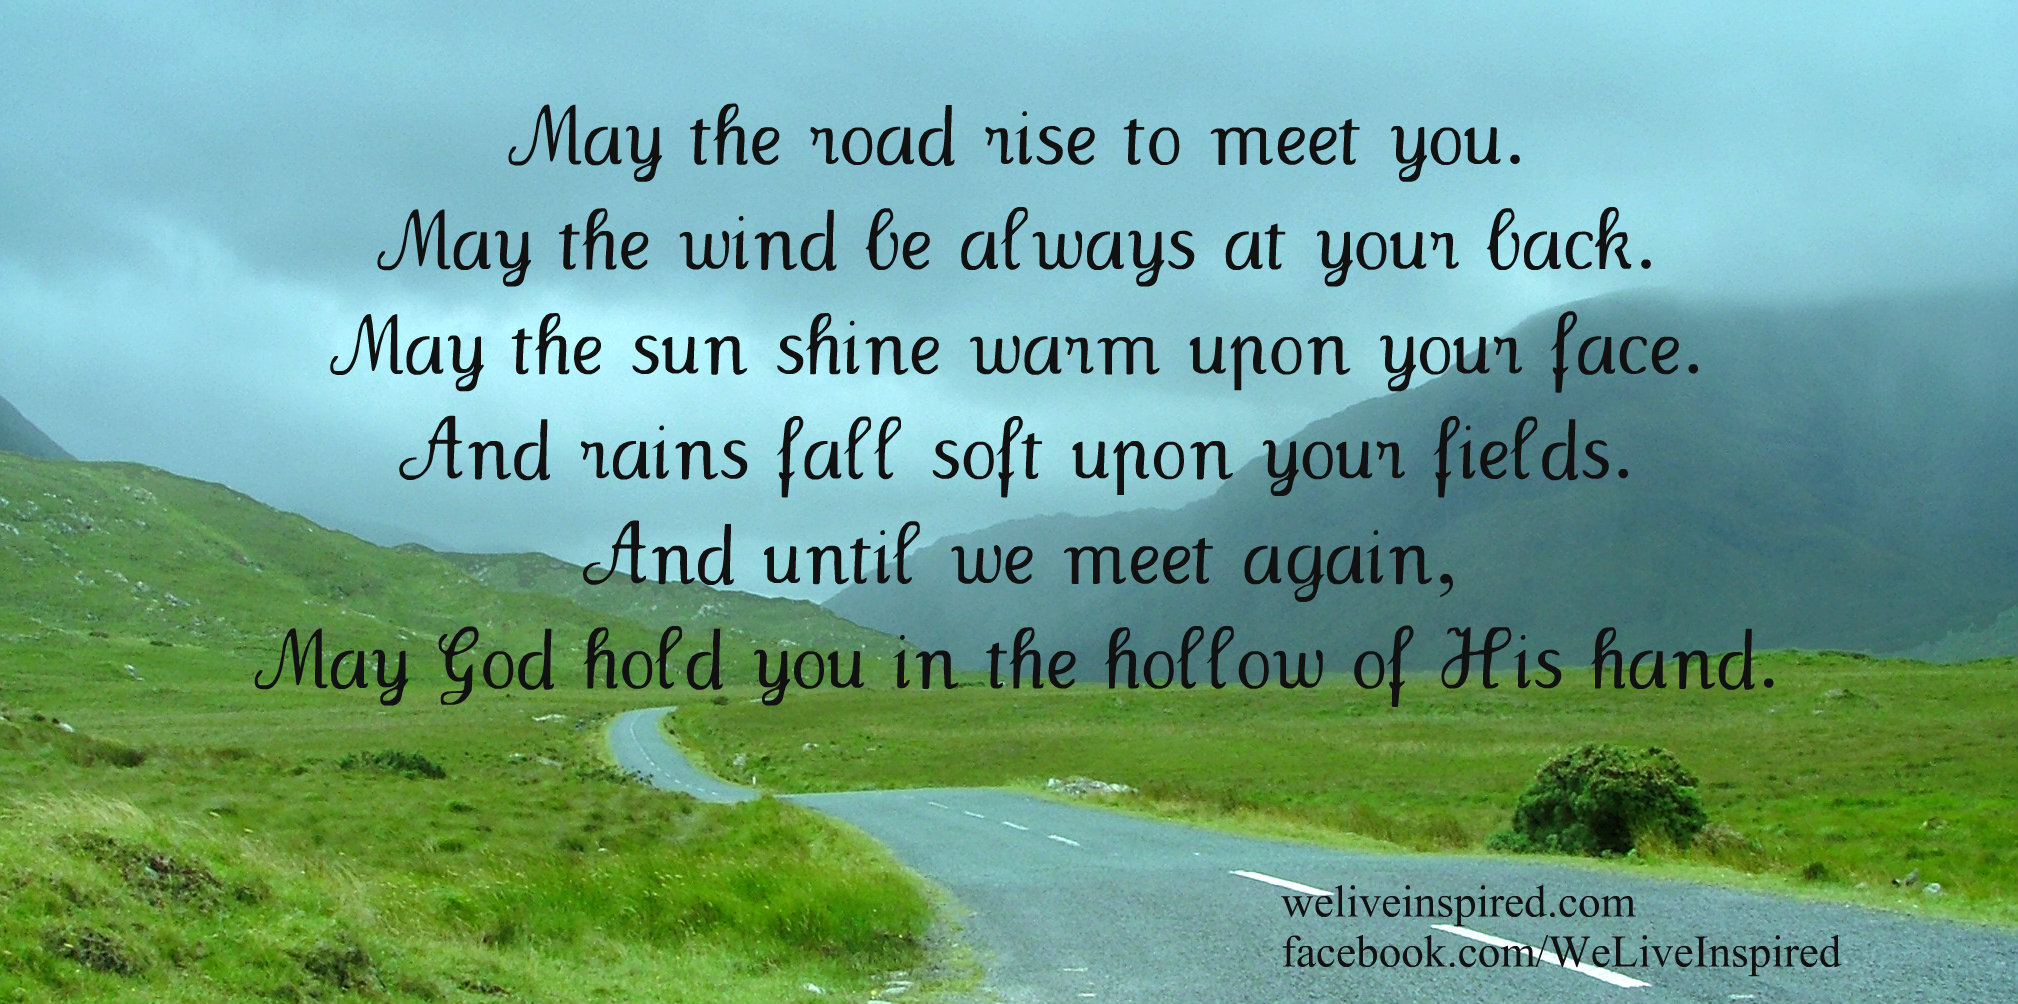 Irish Blessing May The Road Rise To Meet You